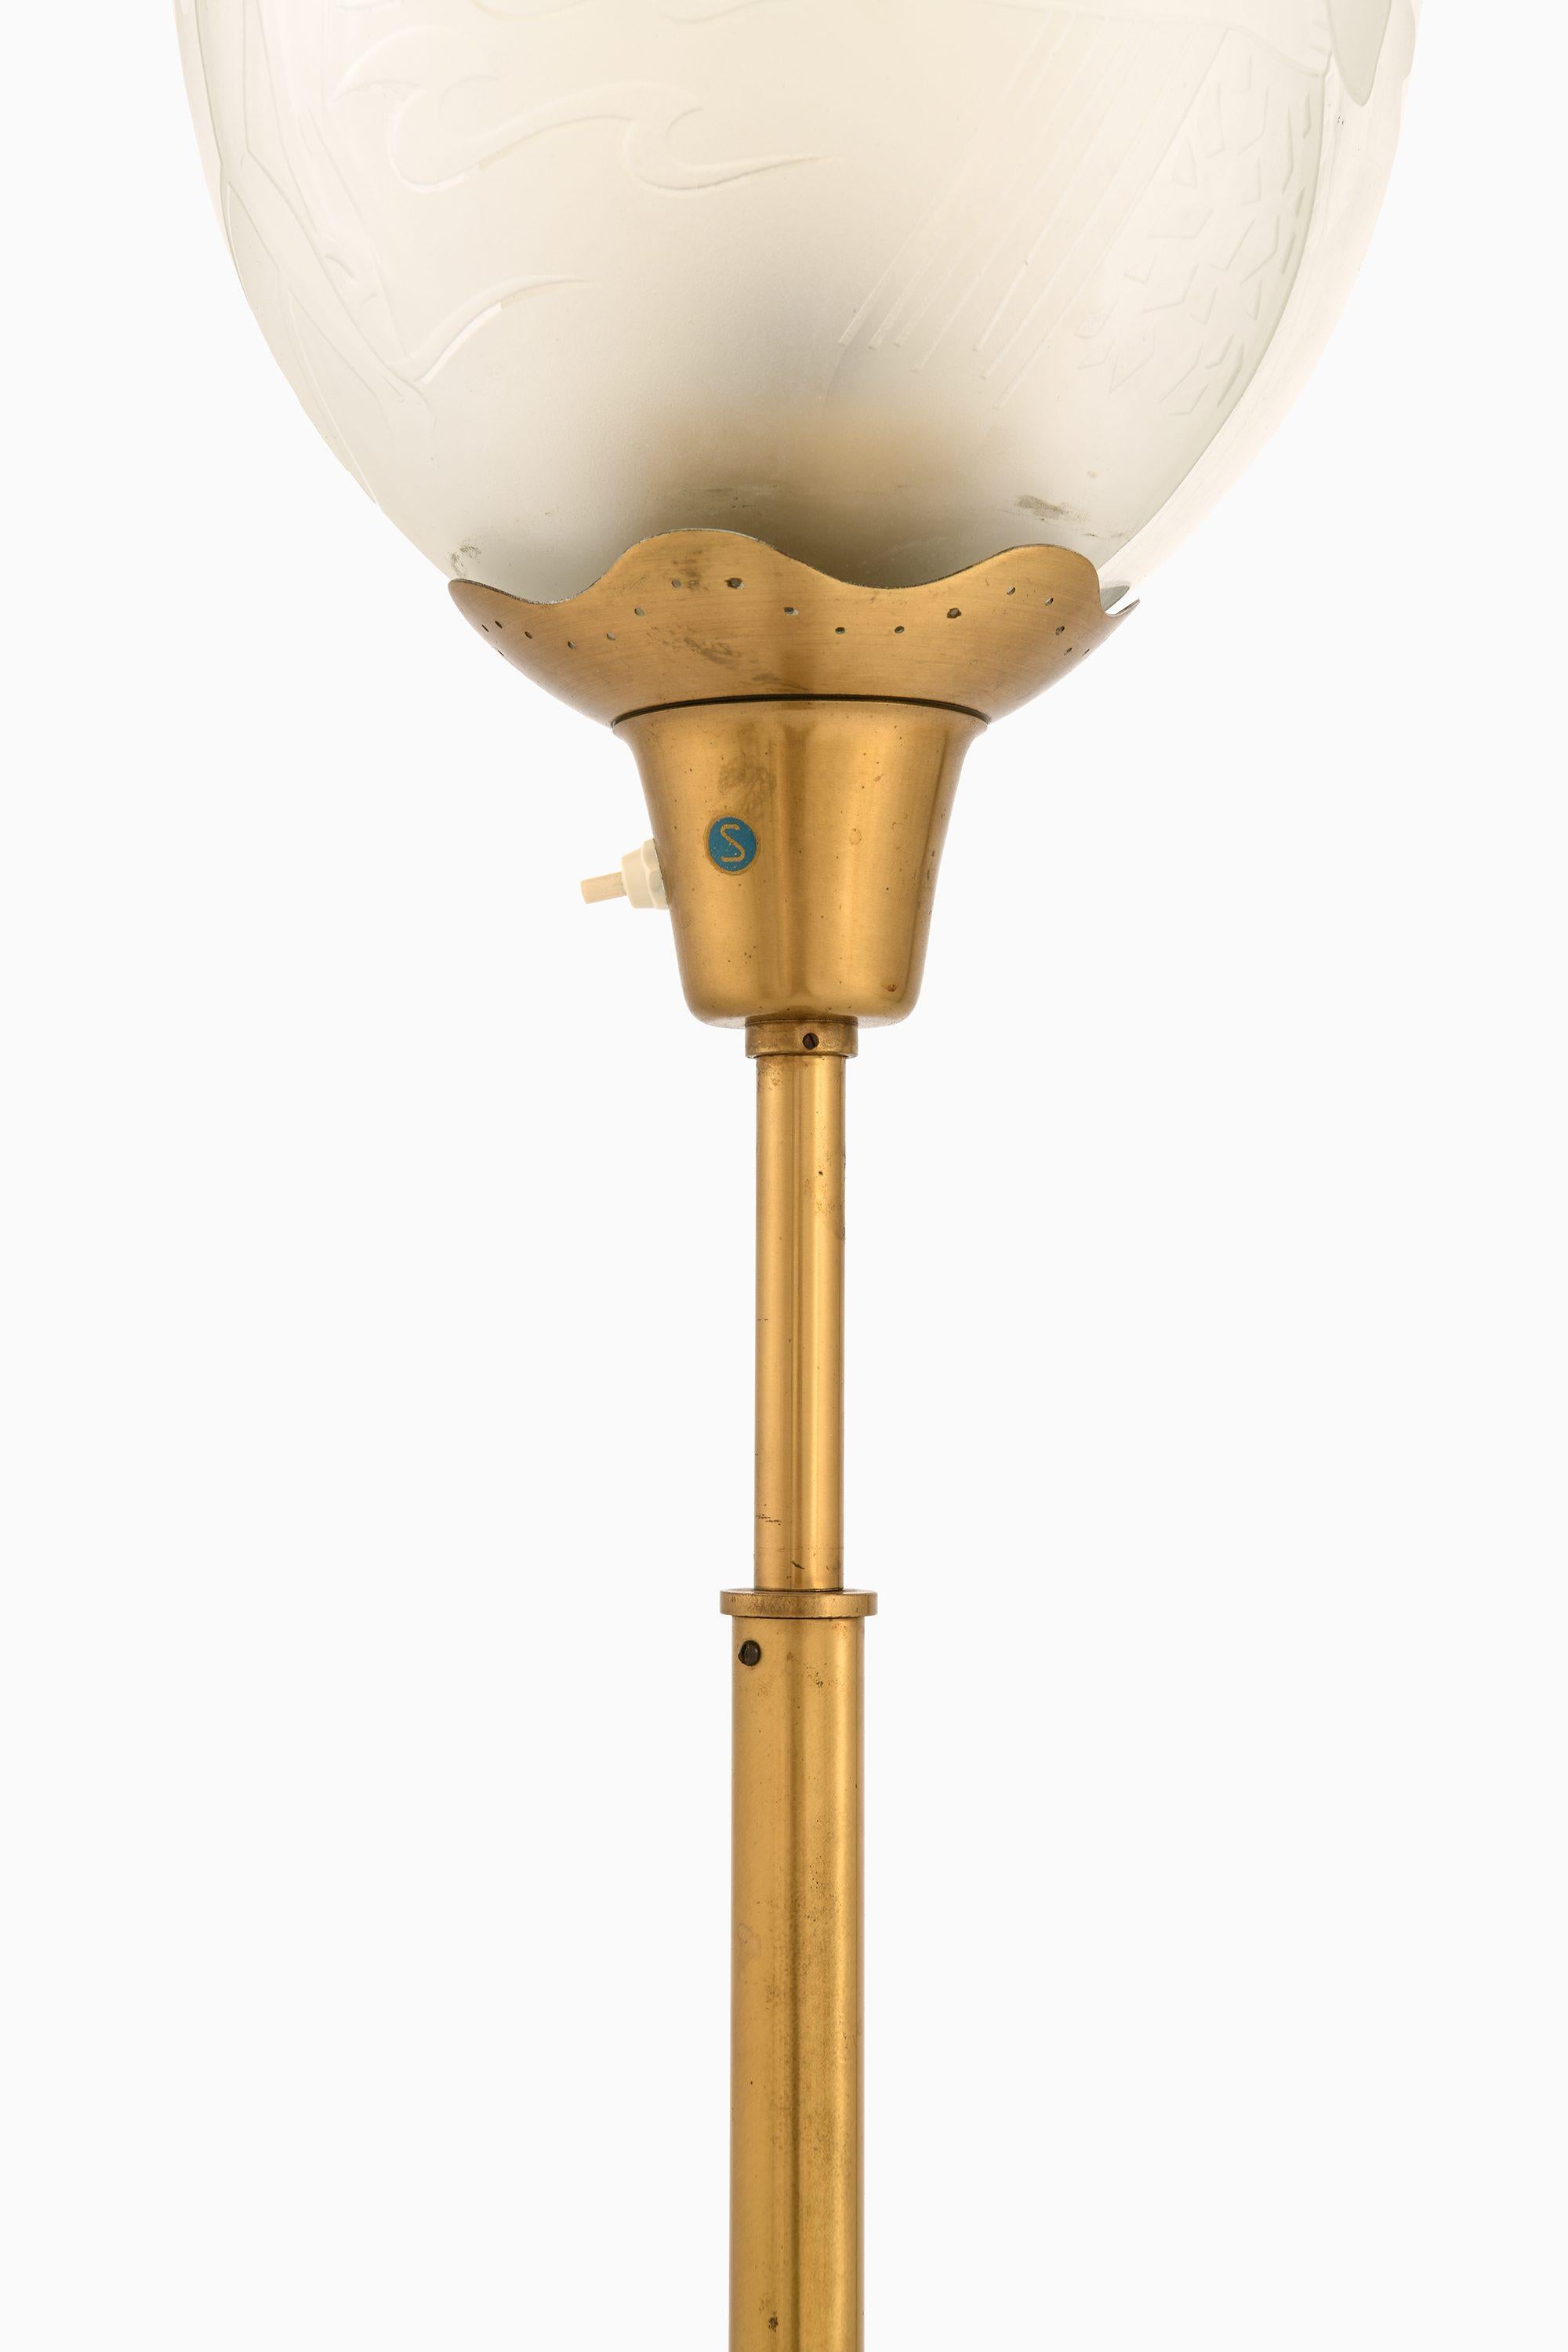 Floor Lamp in Brass and Double Glass Shades by Bo Notini, 1940’s

Additional Information:
Material: Brass, double glass shades
Style: Mid century, Scandinavian
Produced by Glössner & Co in Sweden
Dimensions (W x D x H): 35 x 35 x 171.5 cm
Condition: